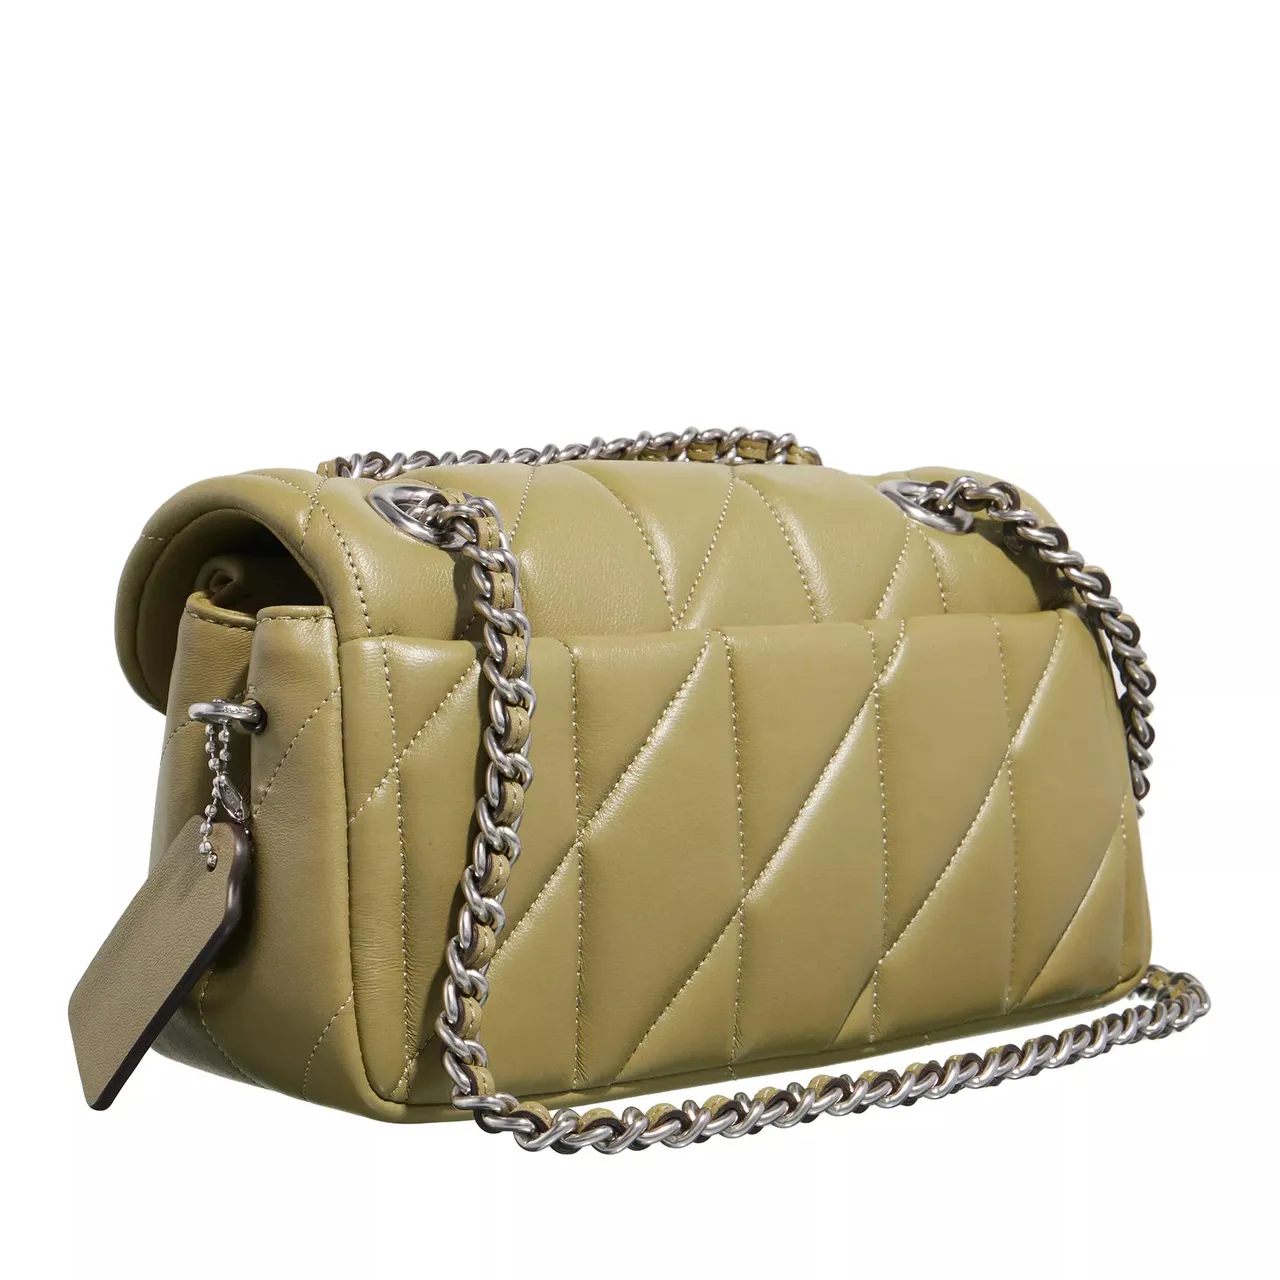 Coach Crossbody Bags - Quilted Leather Covered C Tabby Shoulder Bag 20 Wi - green - Crossbody Bags for ladies